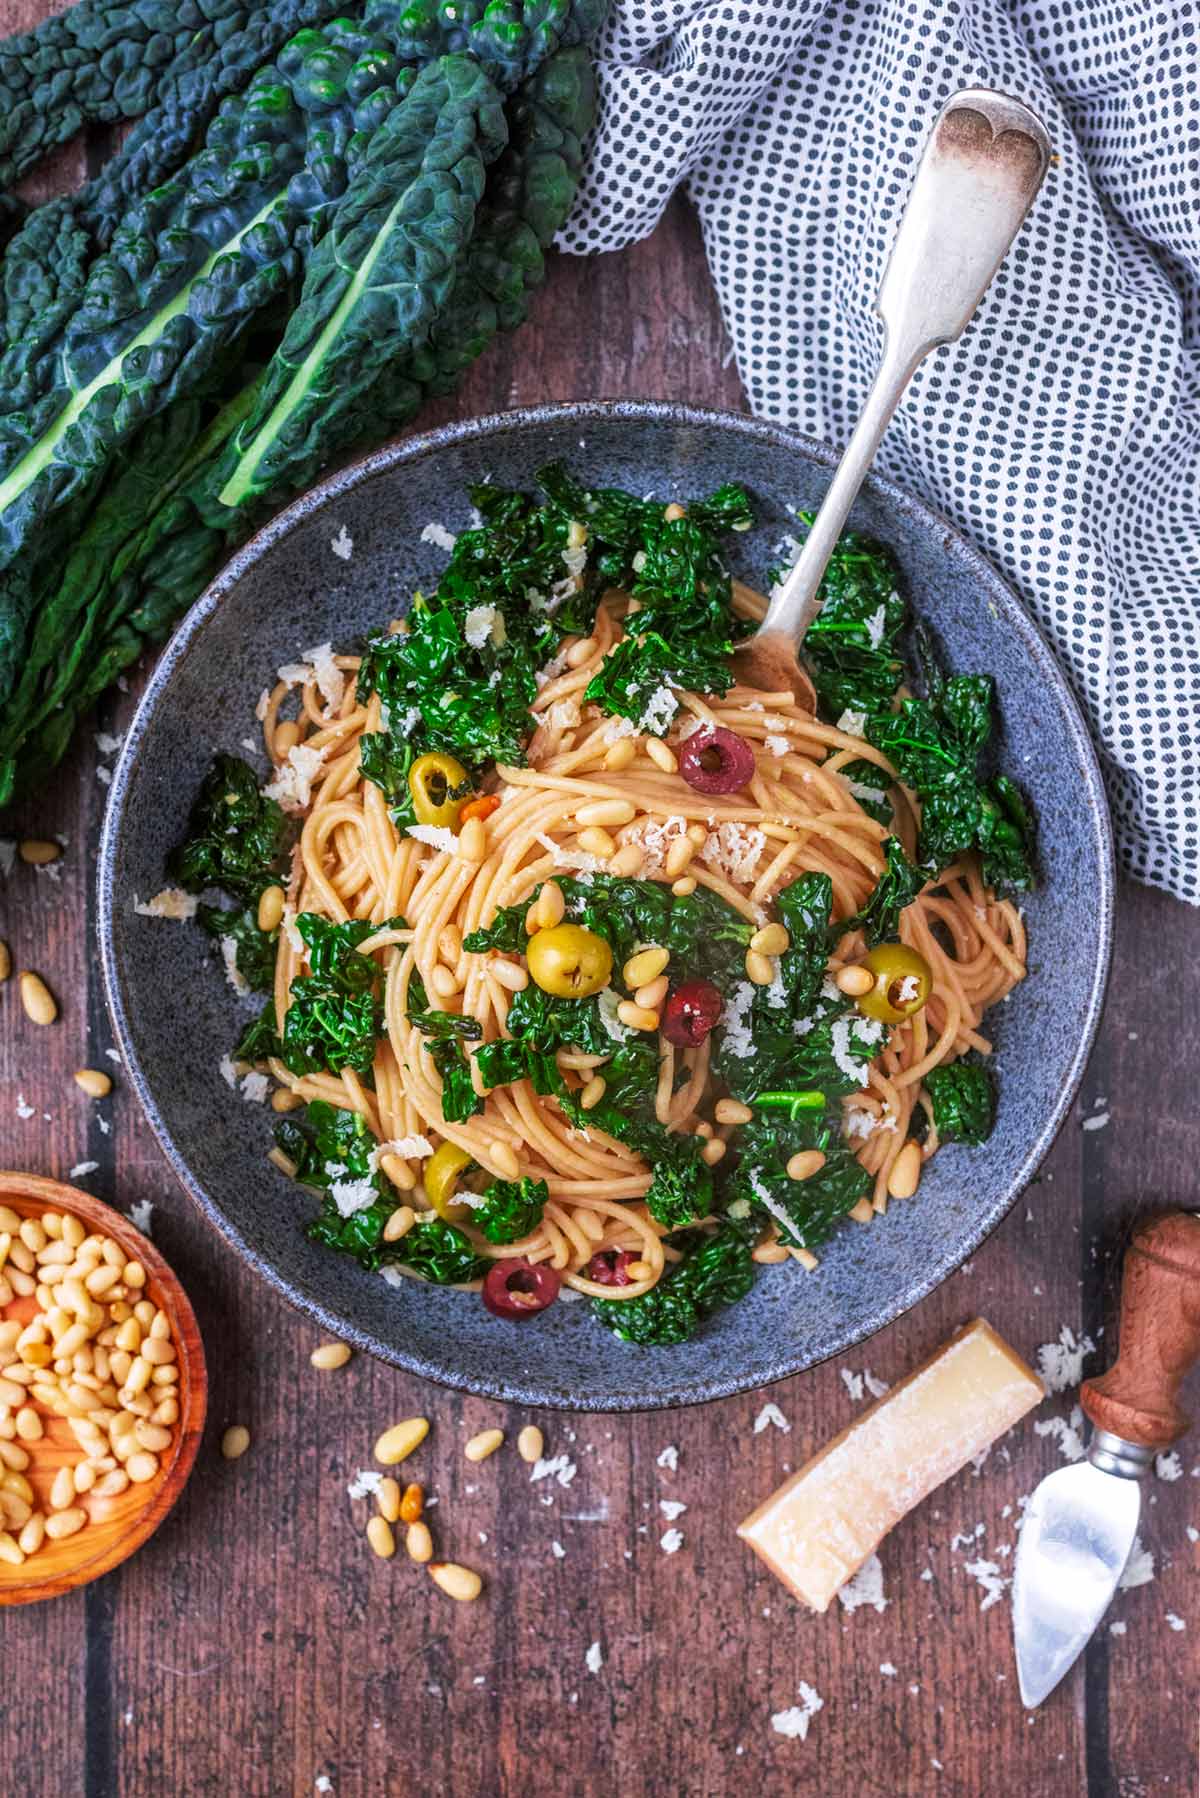 A bowl of spaghetti mixed with cooked cavolo nero on a wooden surface.